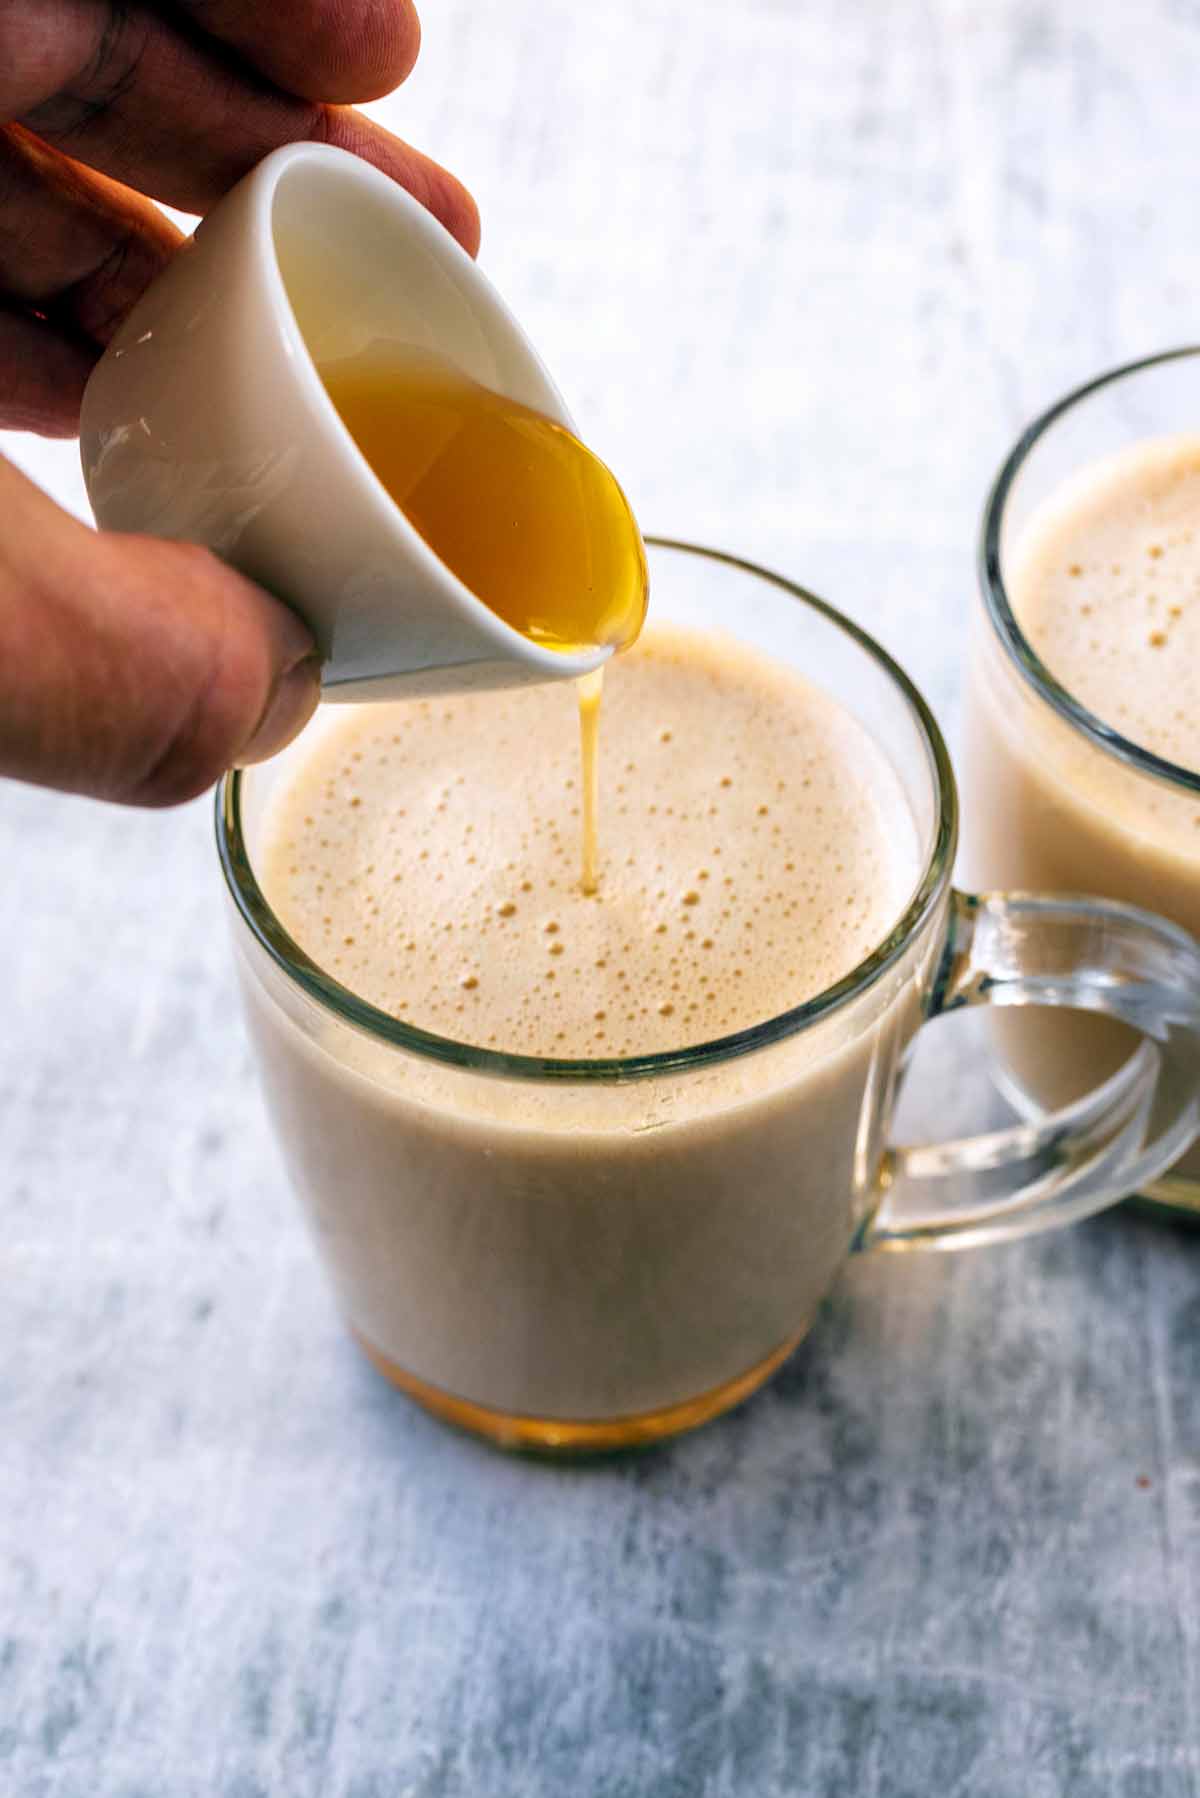 A glass of latte with honey being poured into it.